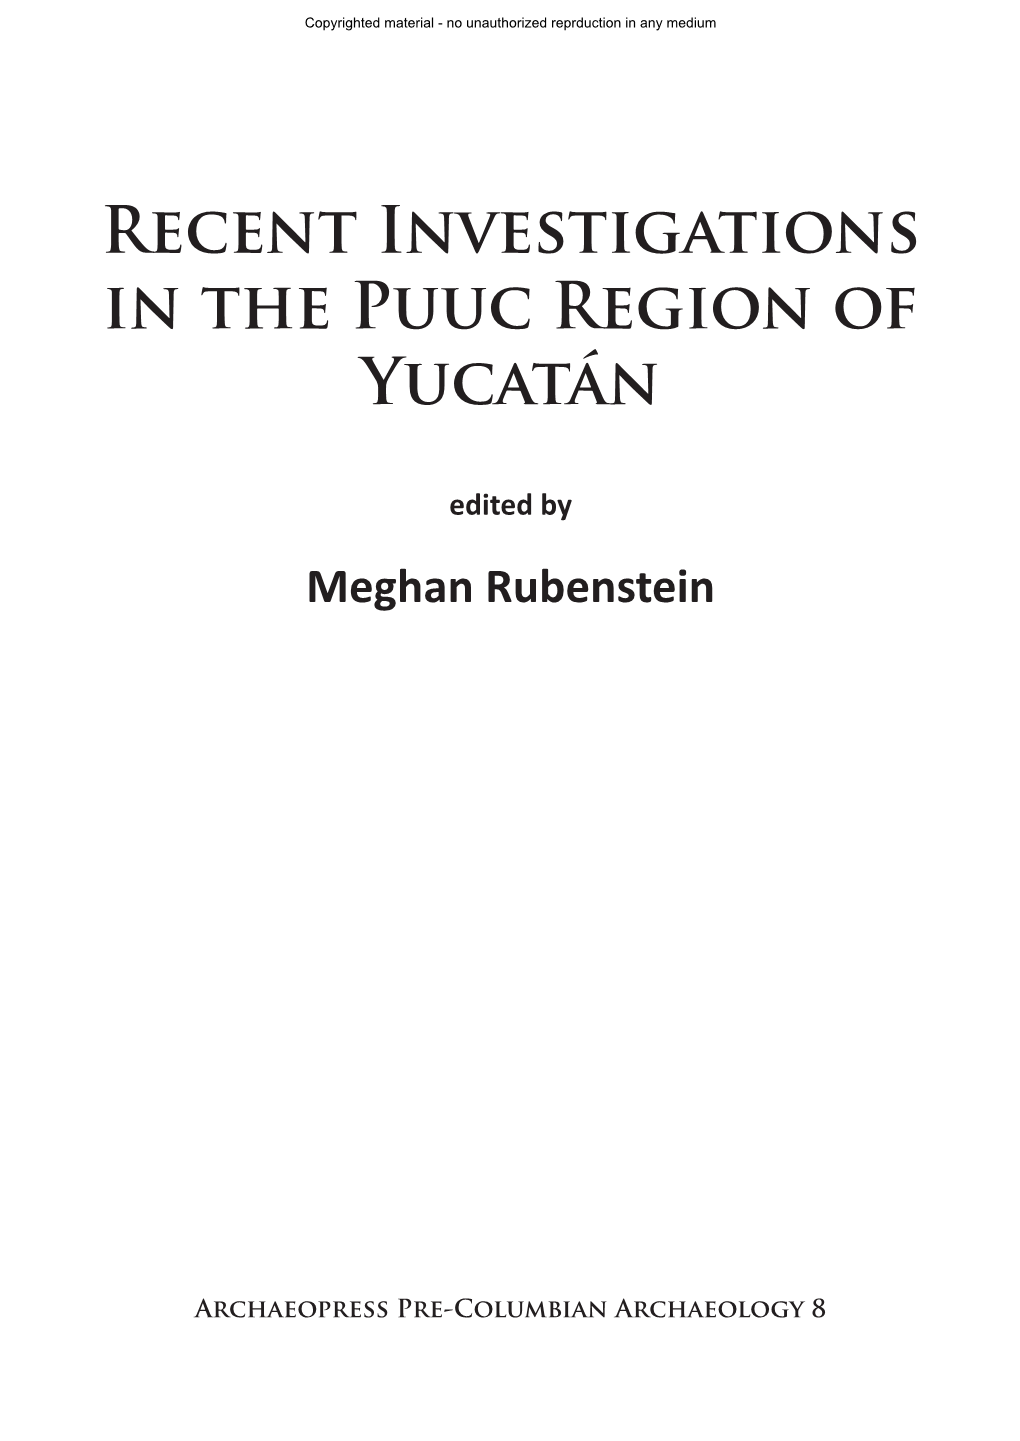 Recent Investigations in the Puuc Region of Yucatán